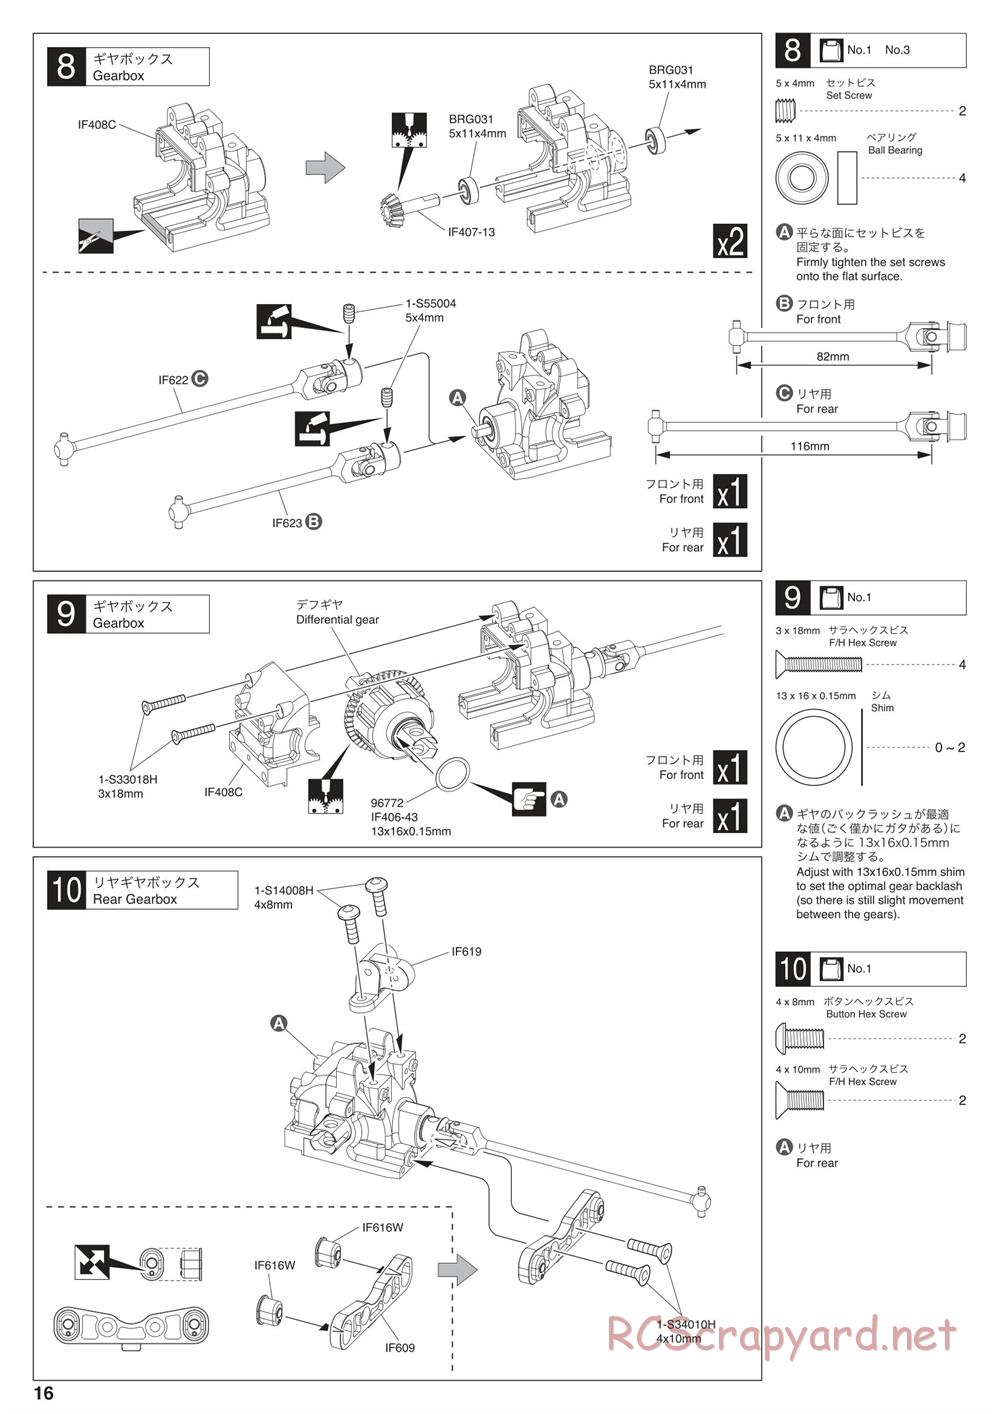 Kyosho - Inferno MP10 - Manual - Page 16